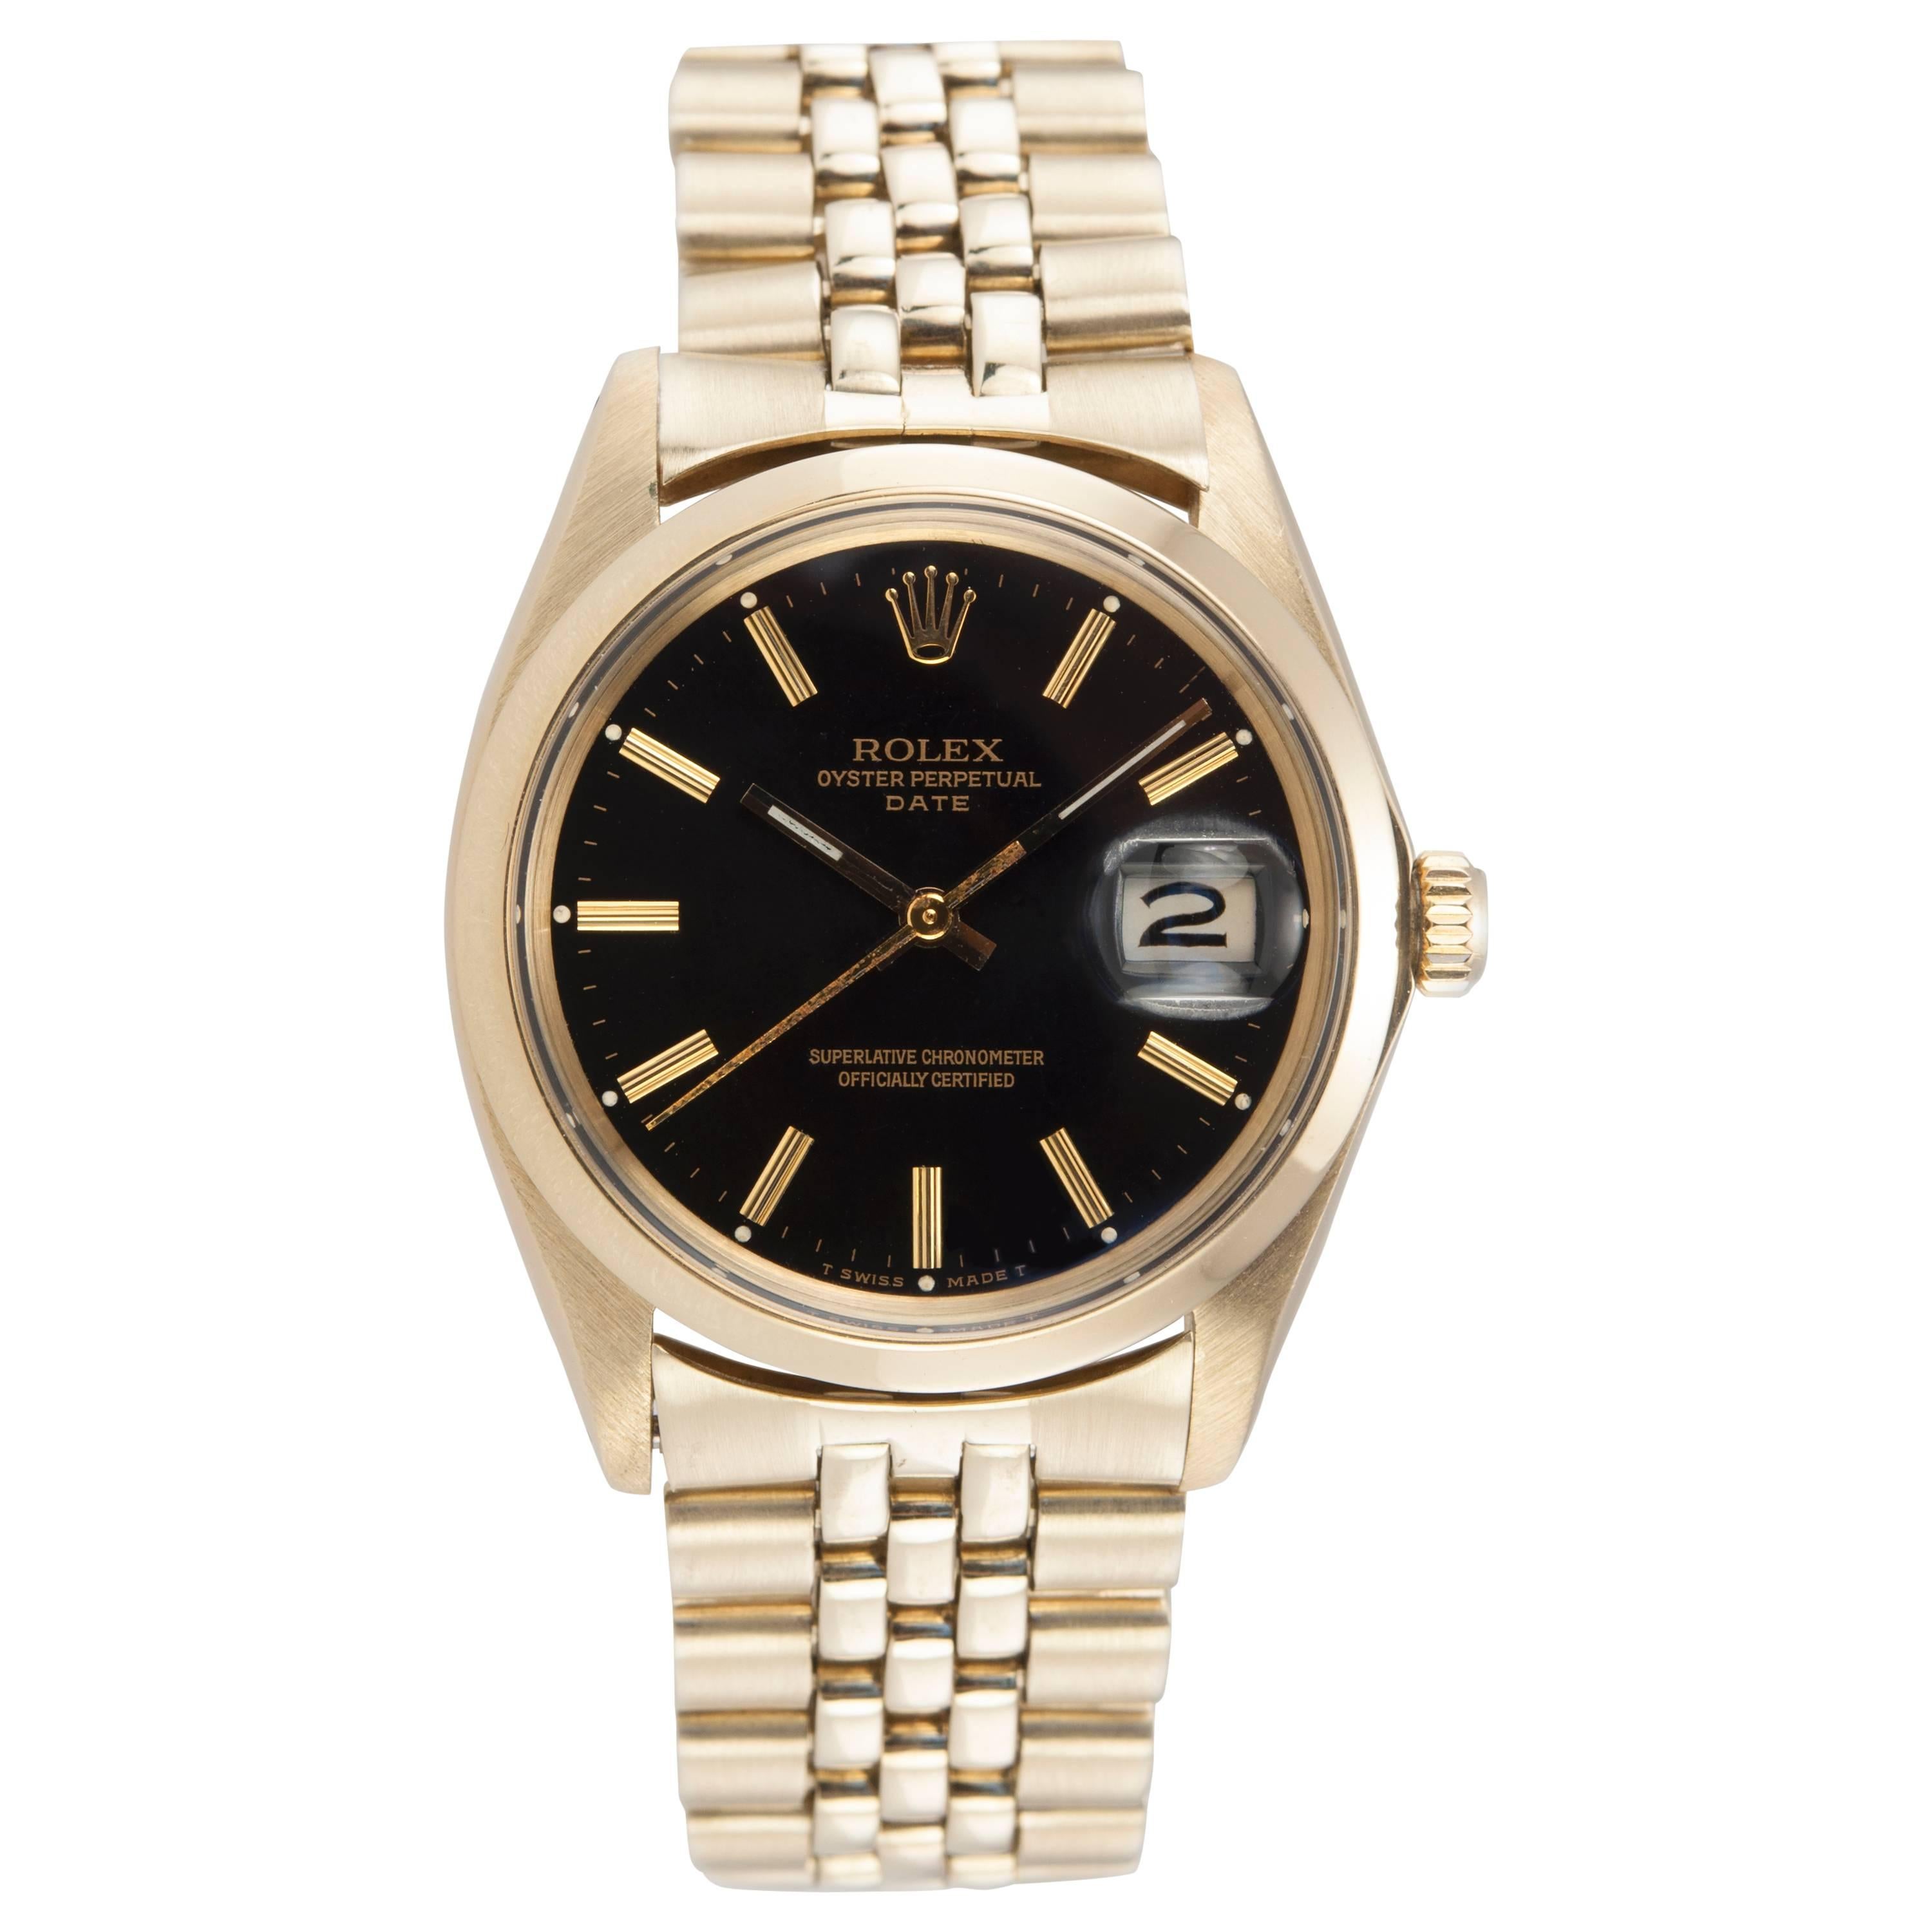 Rolex Yellow Gold Black Dial Date Wristwatch Ref 1503-8 For Sale